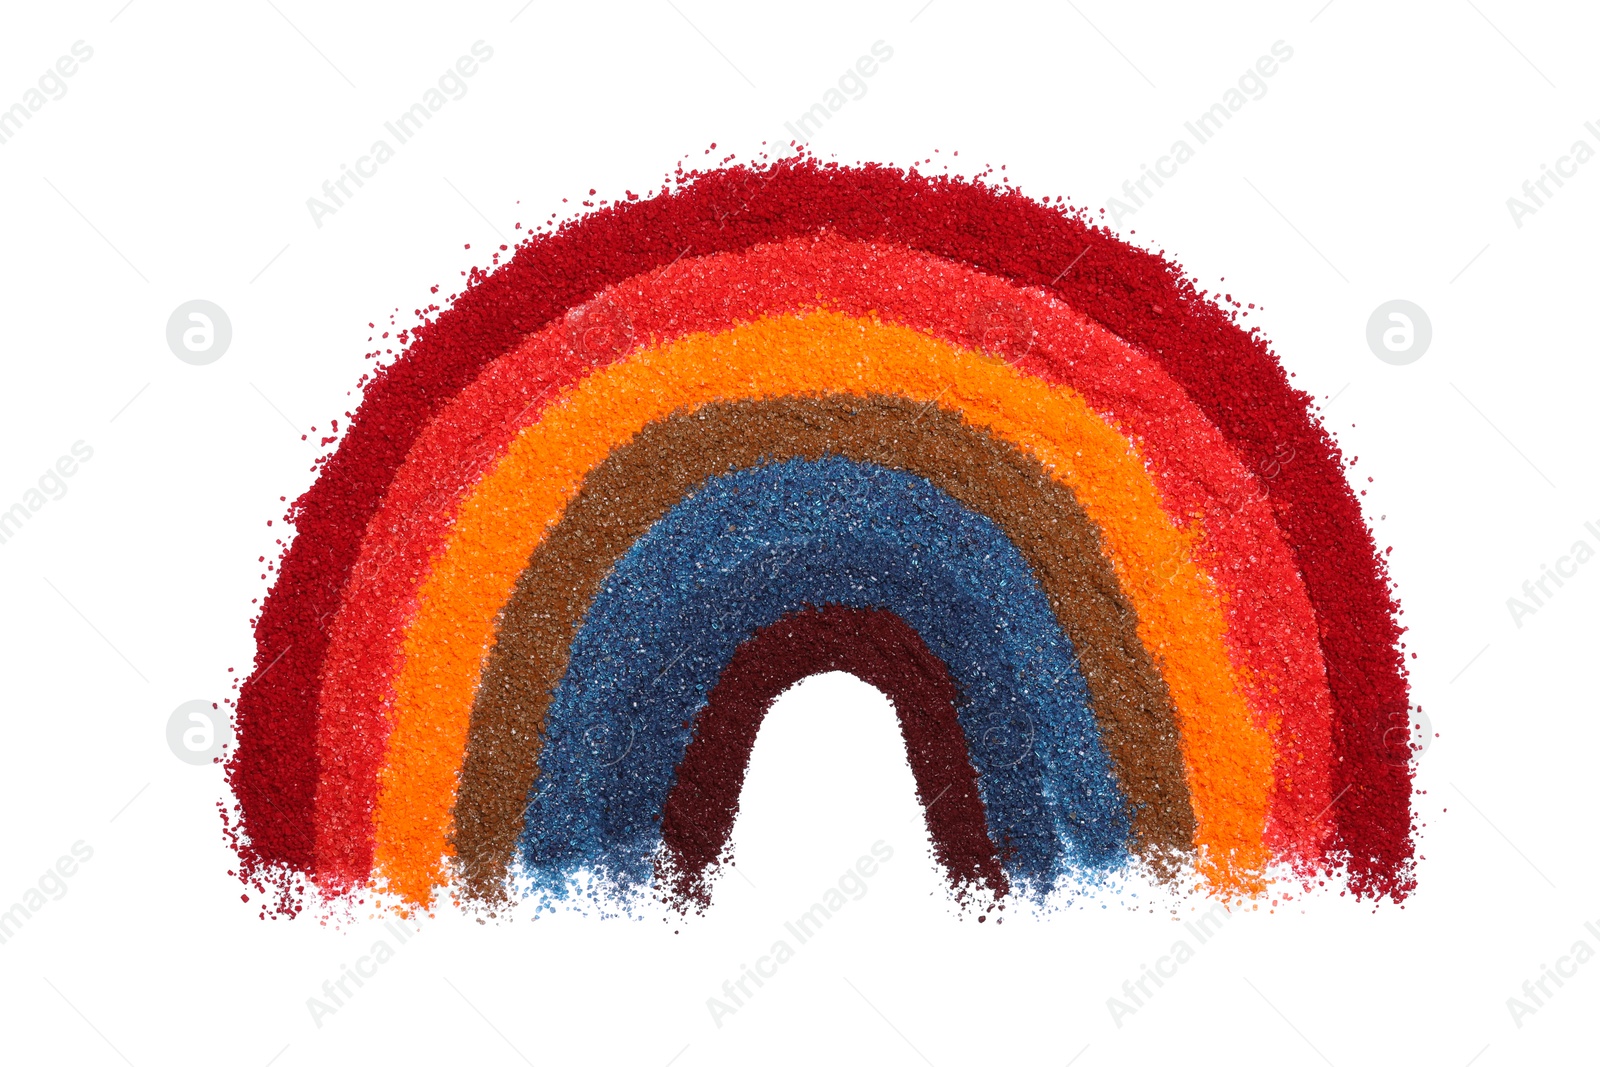 Photo of Rainbow made of different food coloring on white background, top view